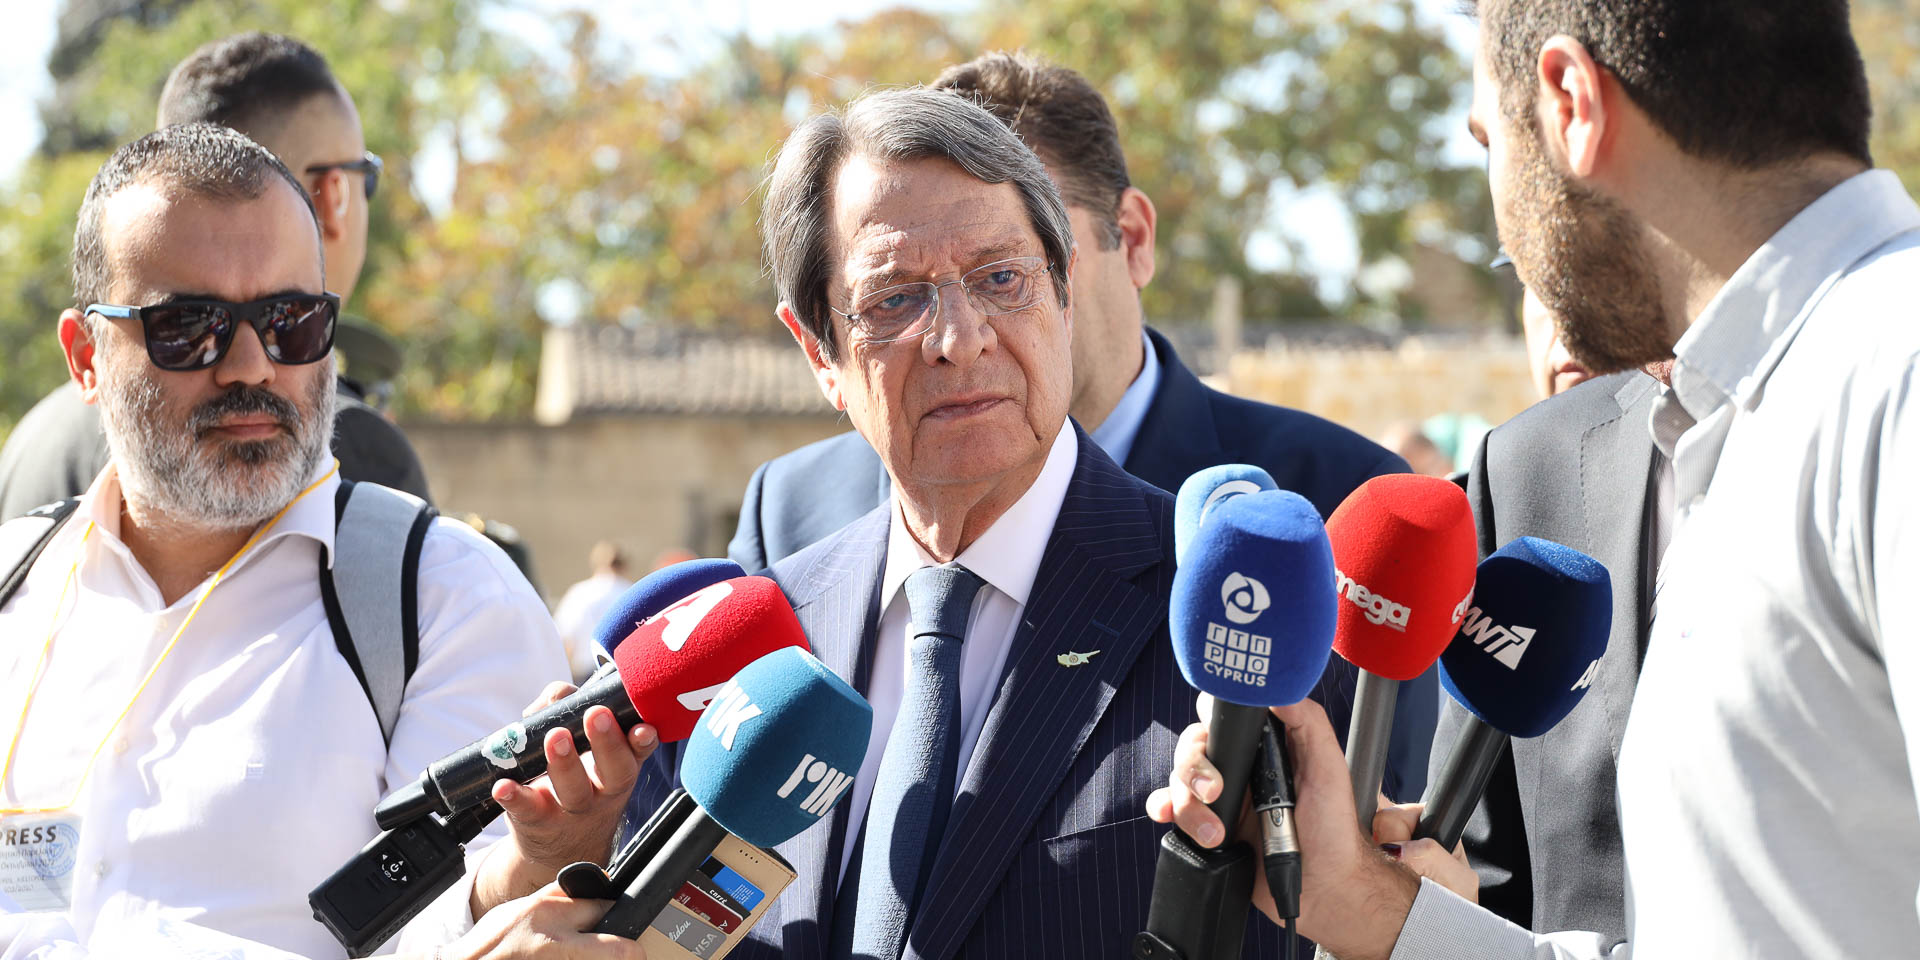 image Anastasiades says ‘steps are being taken’ over issues with Unficyp